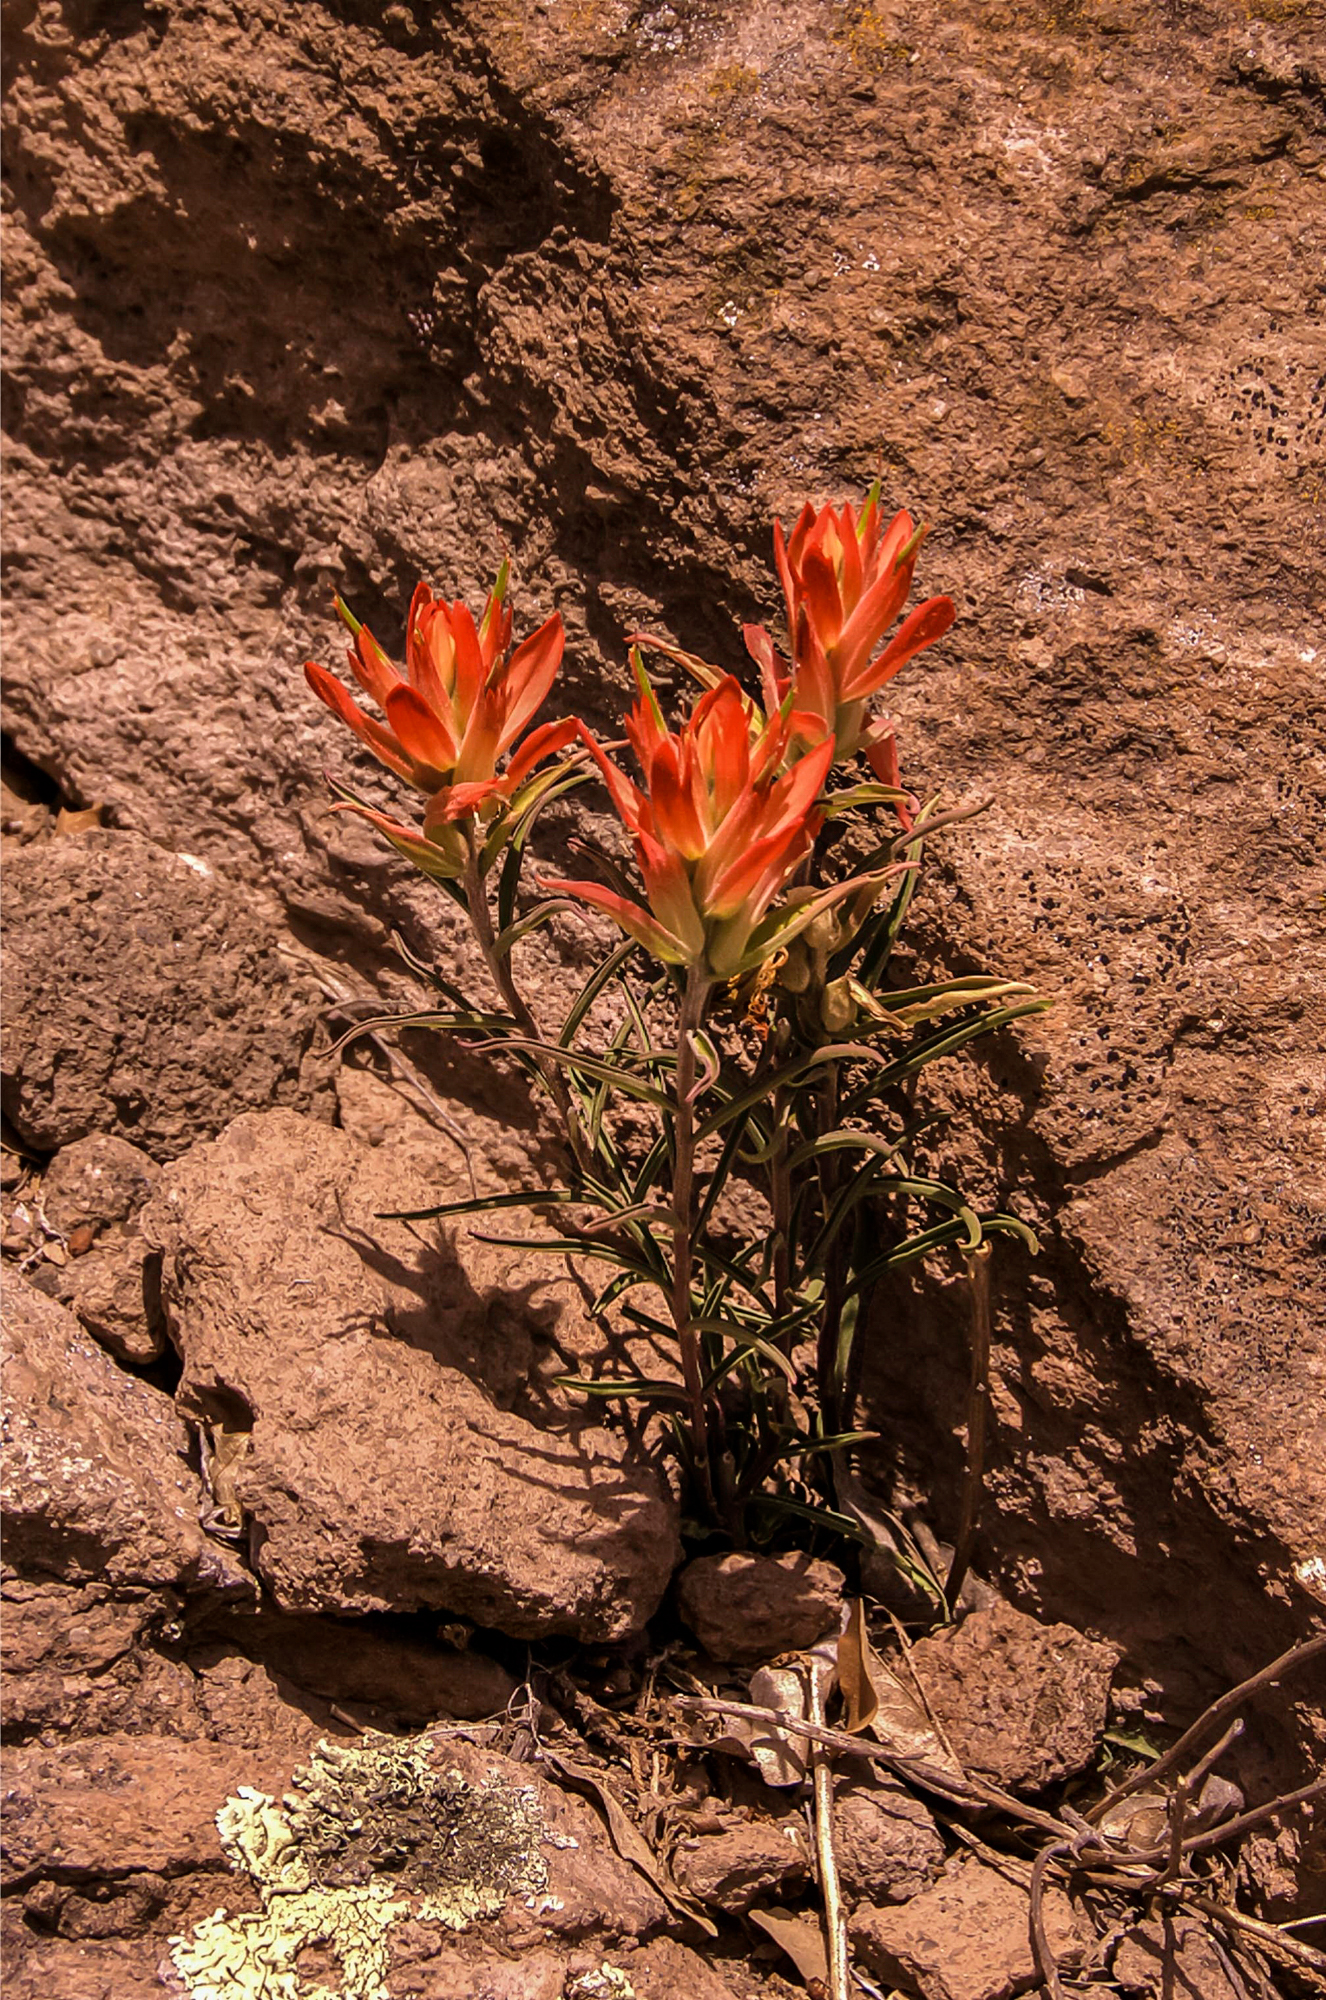 Photo Note Card: 
Indian Paintbrush wildflowers,  was taken along the Frijoles Canyon trail in Bandelier National Monument, near Los Alamos in northwest New Mexico